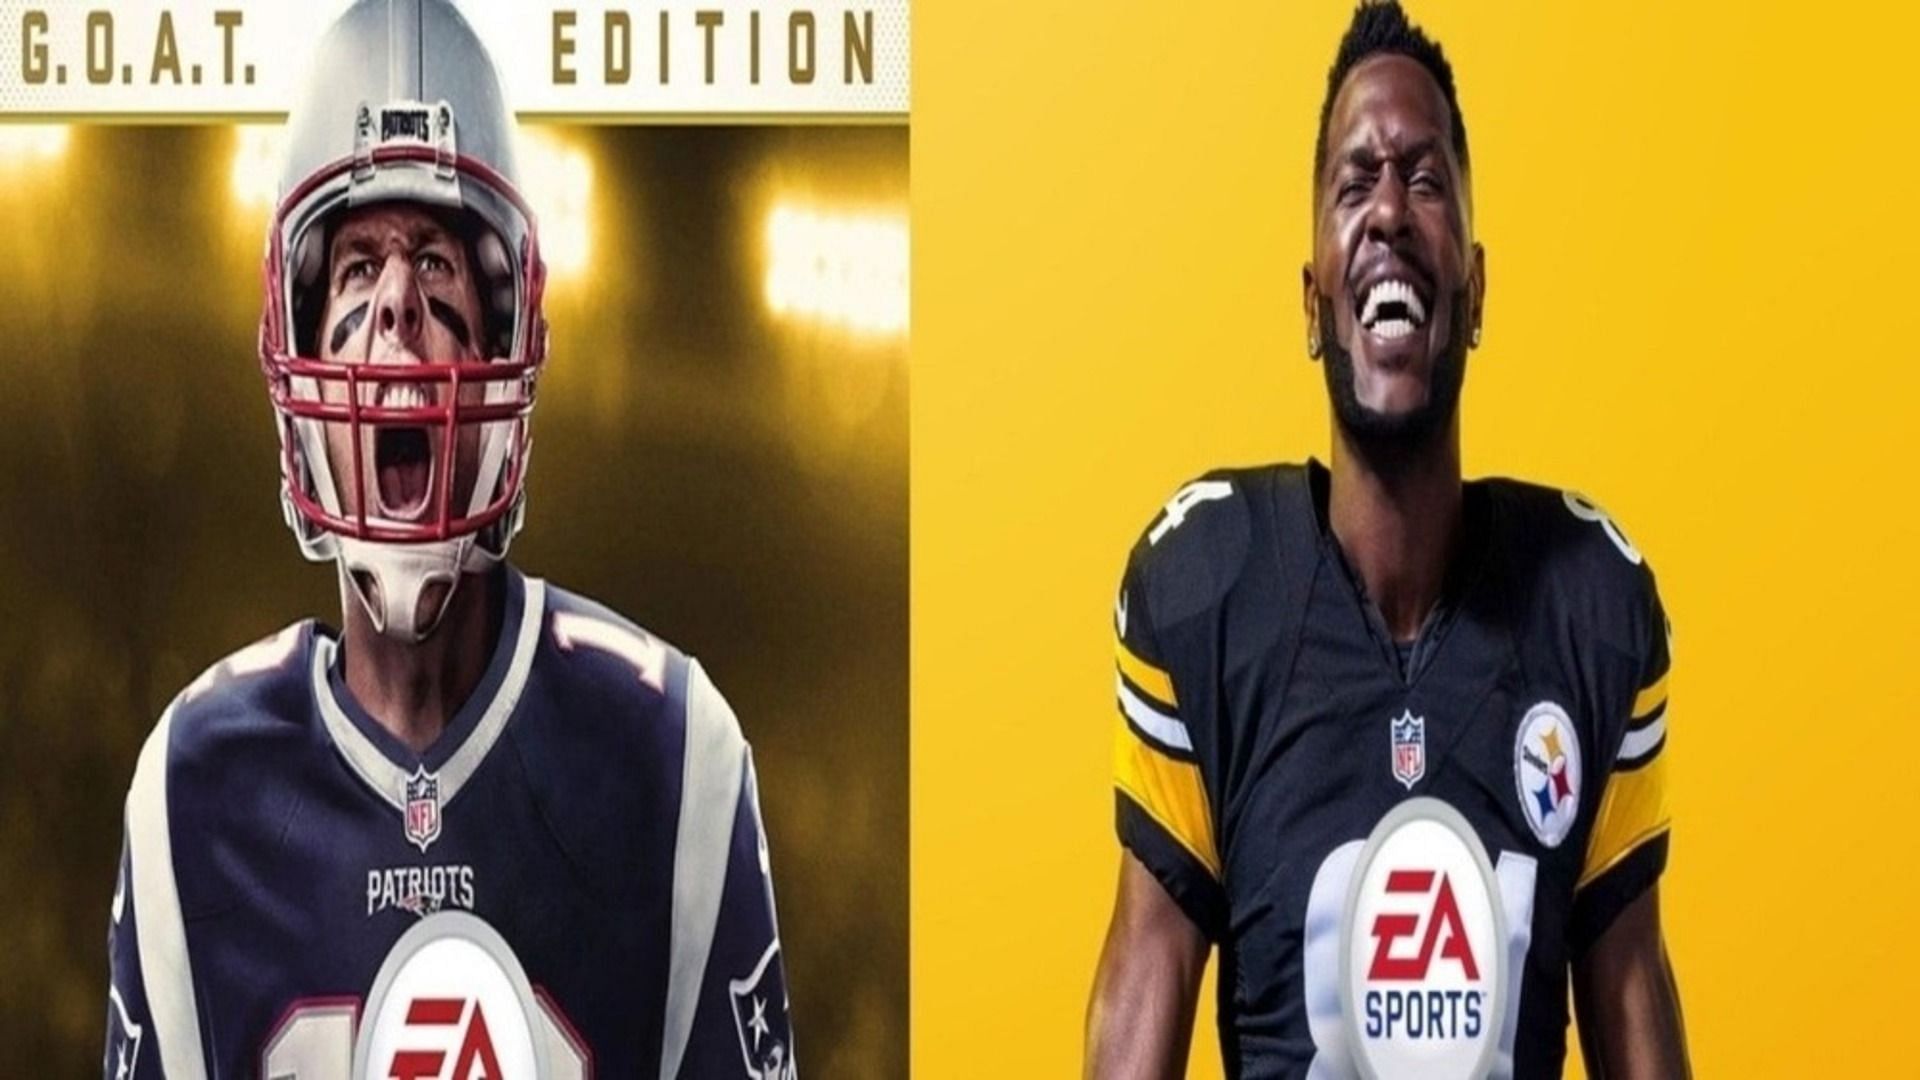 madden covers in order